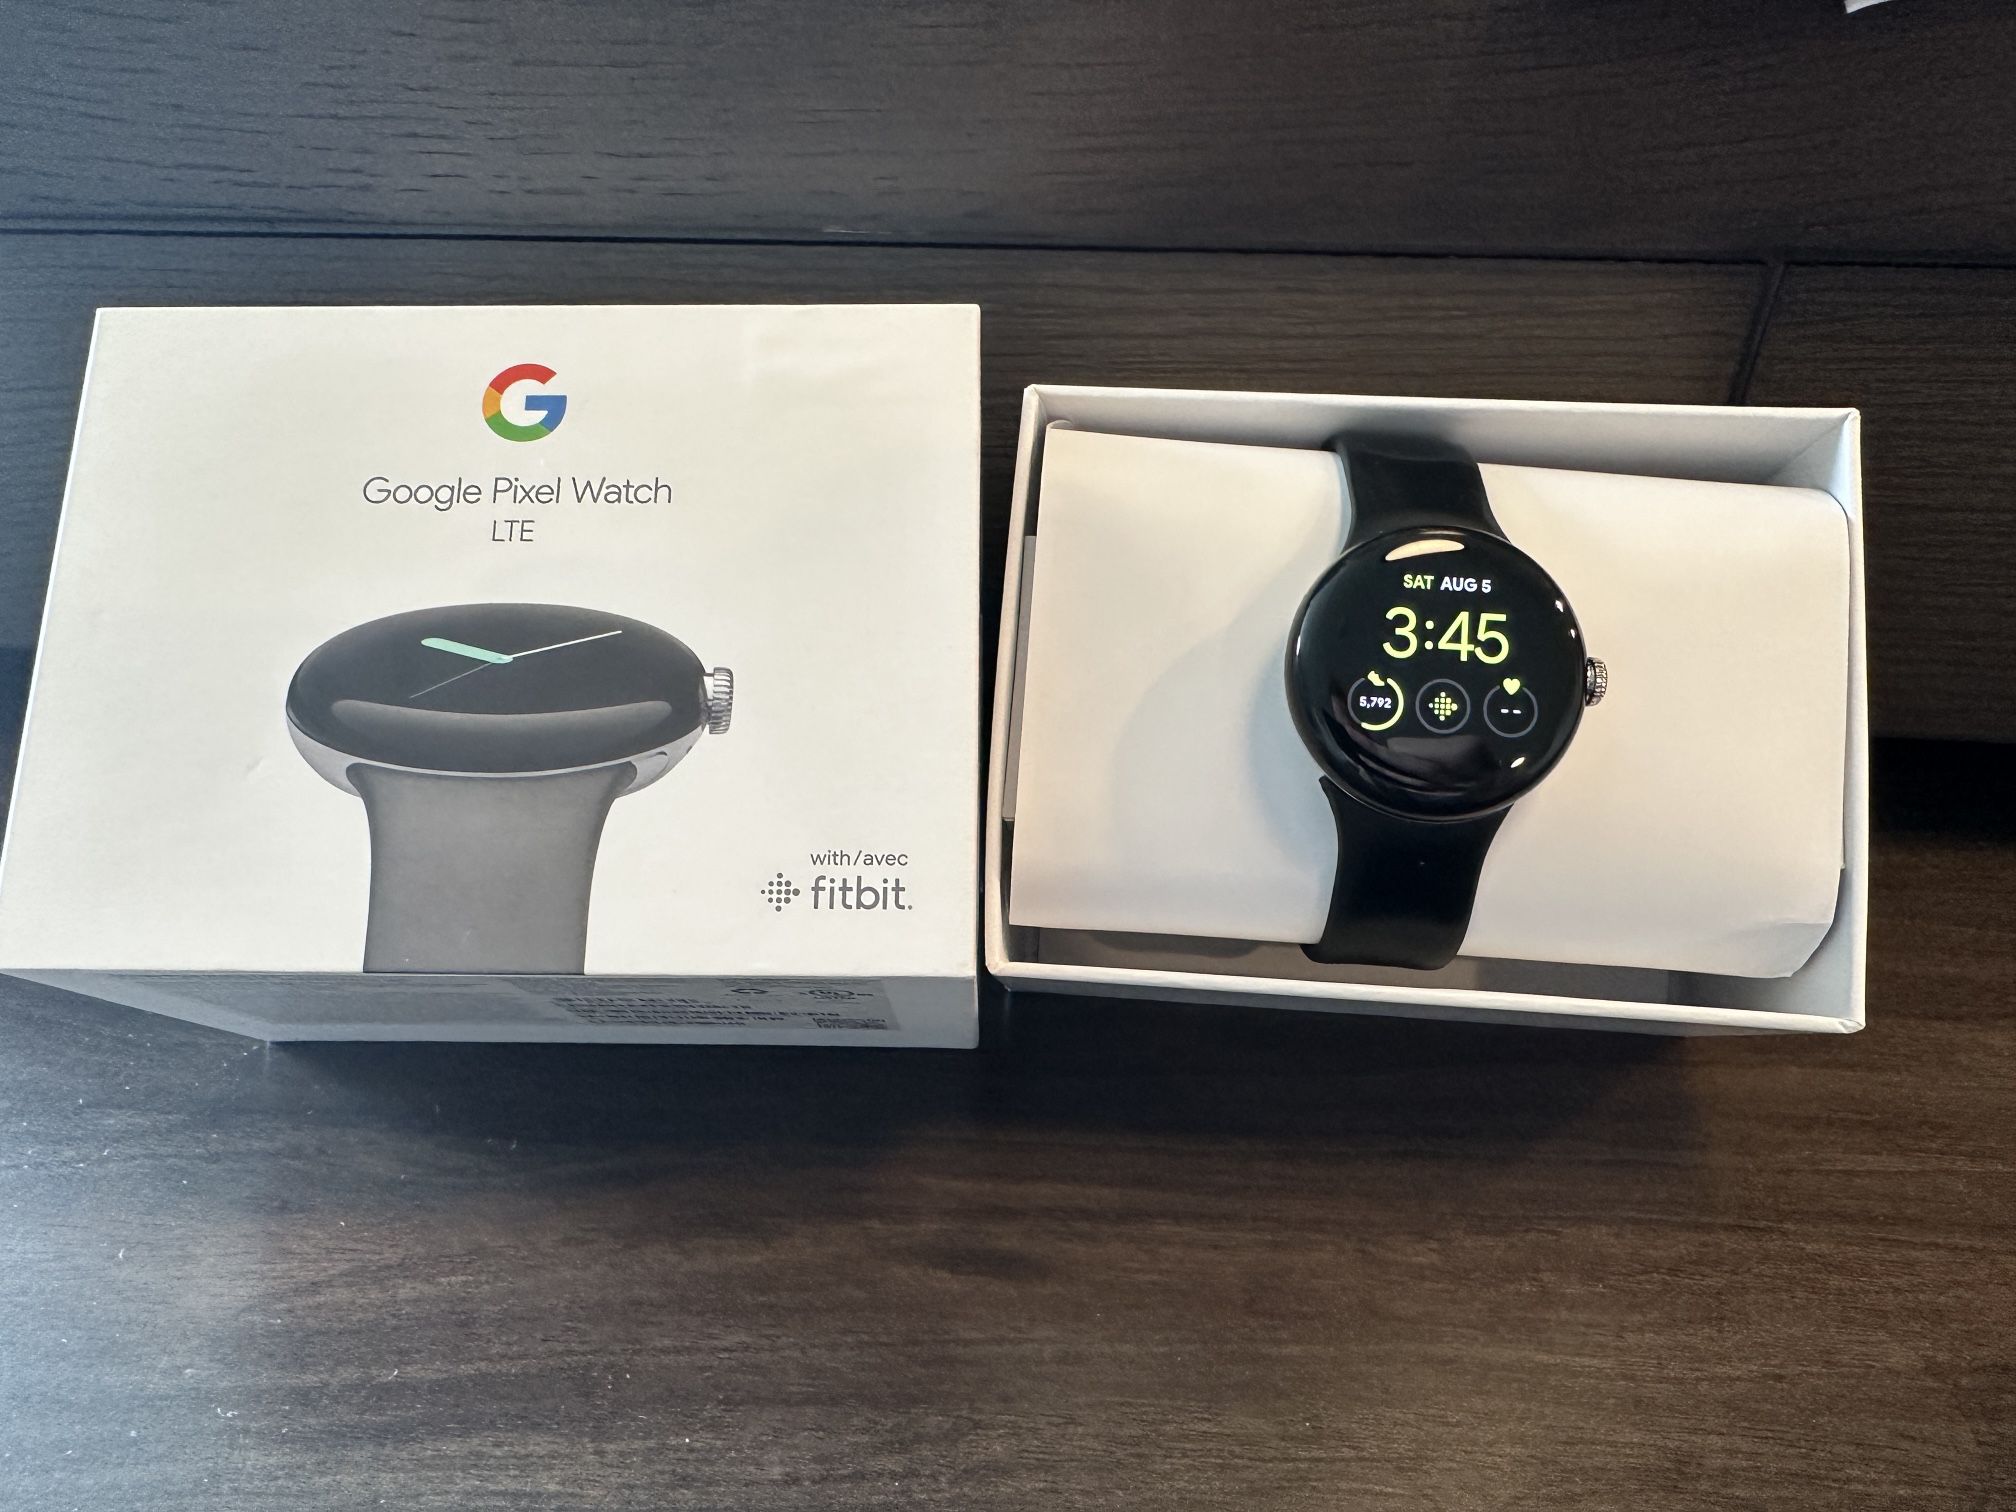 Google Pixel Watch Wifi + LTE Like New With Box for Sale in